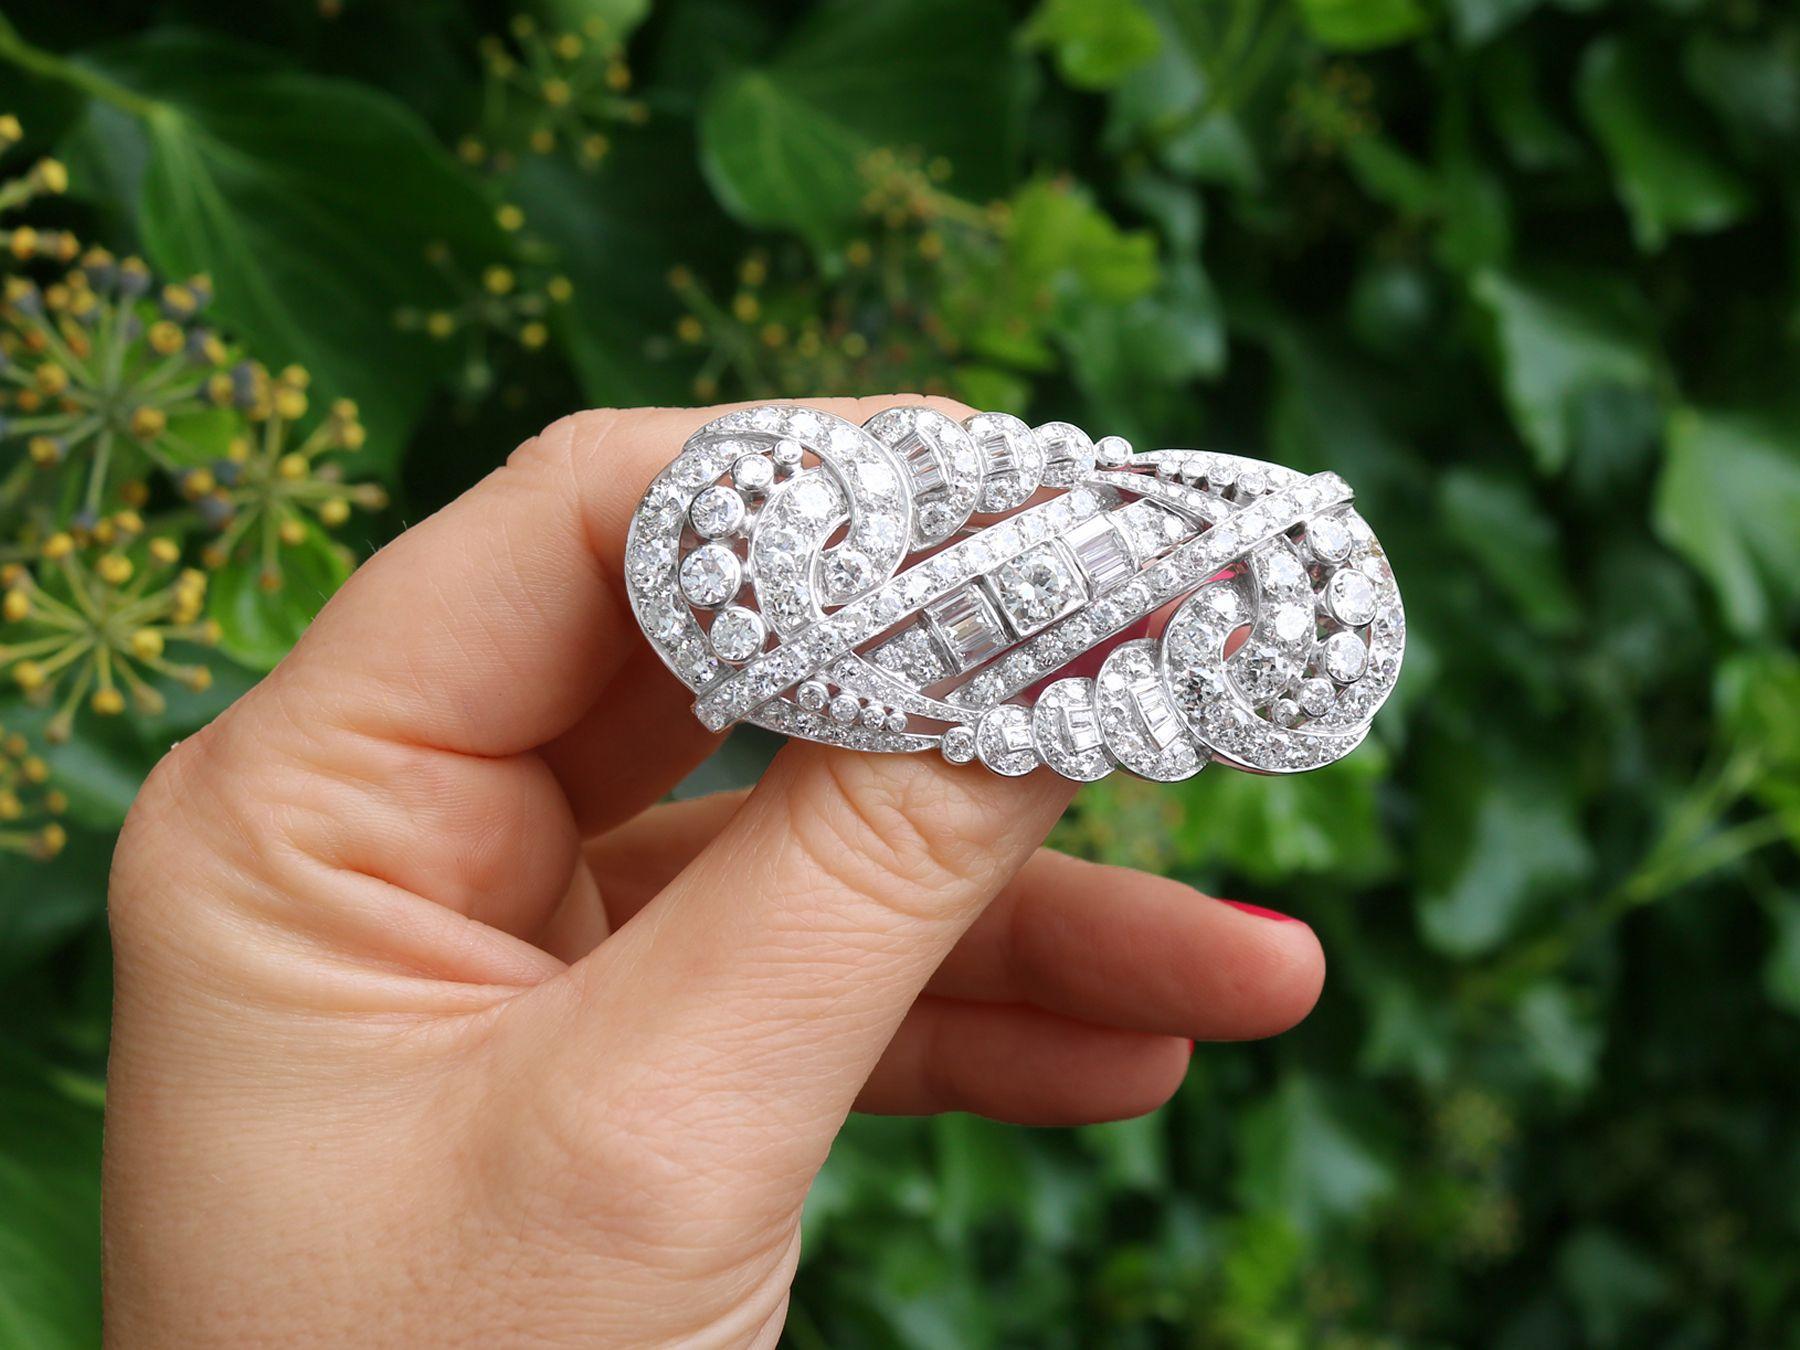 A stunning antique Art Deco 12.64 carat diamond and platinum brooch; part of our diverse antique jewelry and estate jewelry collections.

This stunning, fine and impressive Art Deco brooch with diamonds has been crafted in platinum.

The Art Deco